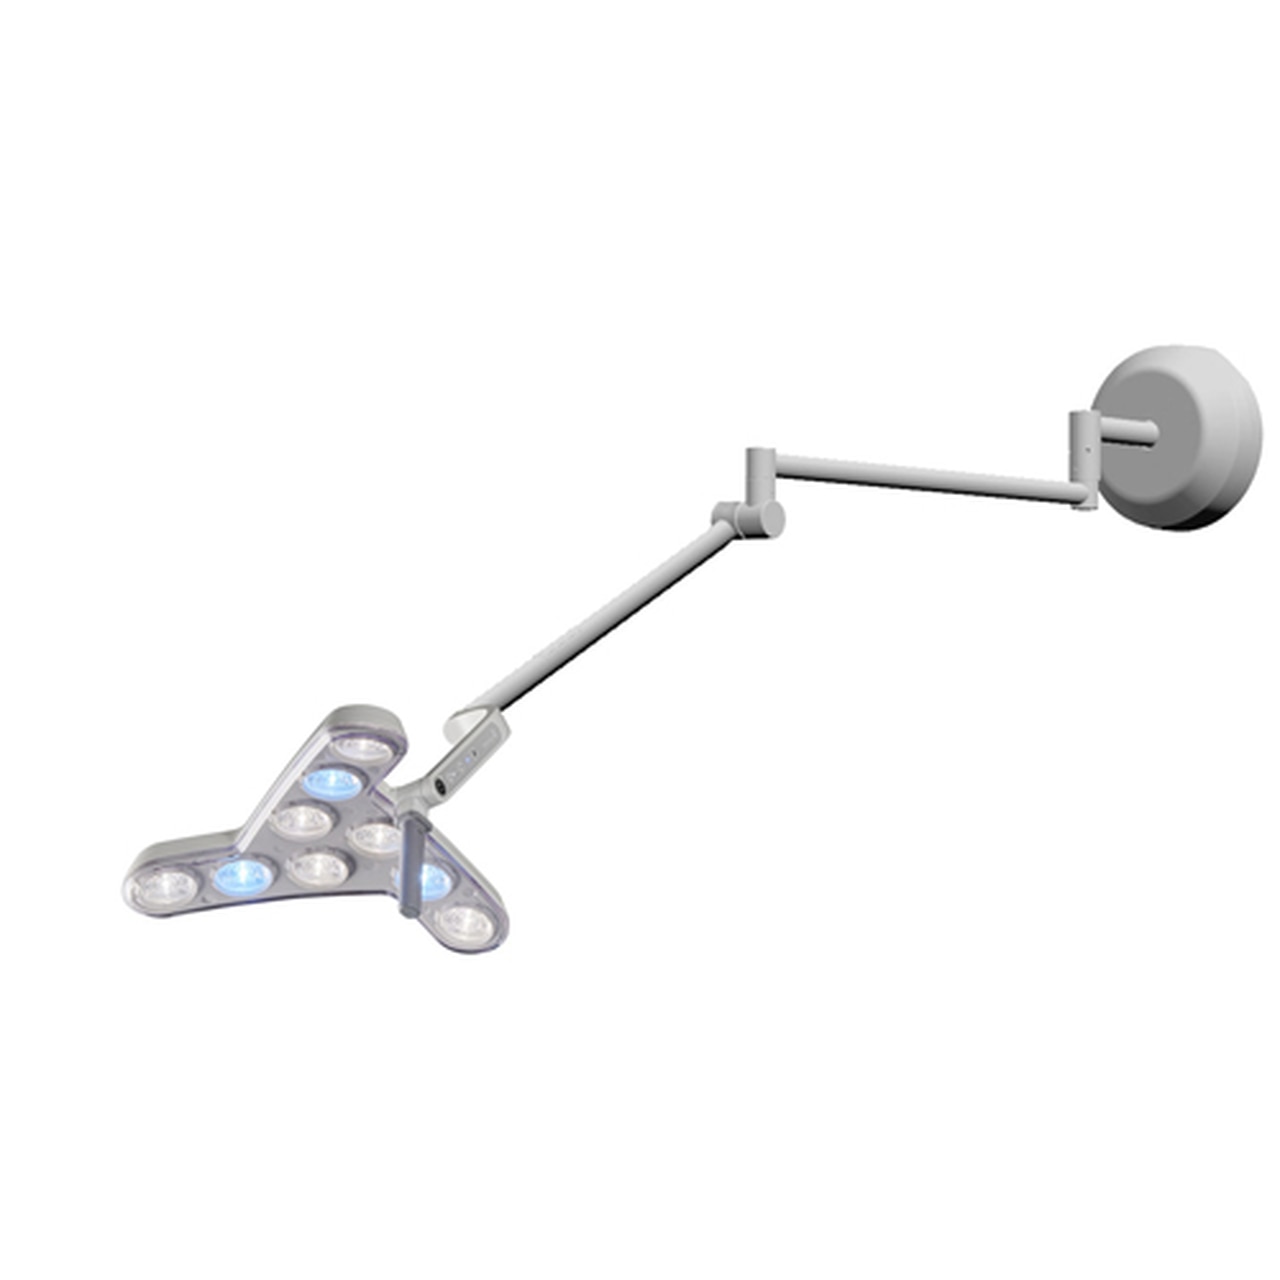 Waldmann D16081000, TRIANGO ENDO LED 100-1 W LED Procedure Light, Medical Grade, Wall Mount, with Dimming, with Endo Mode